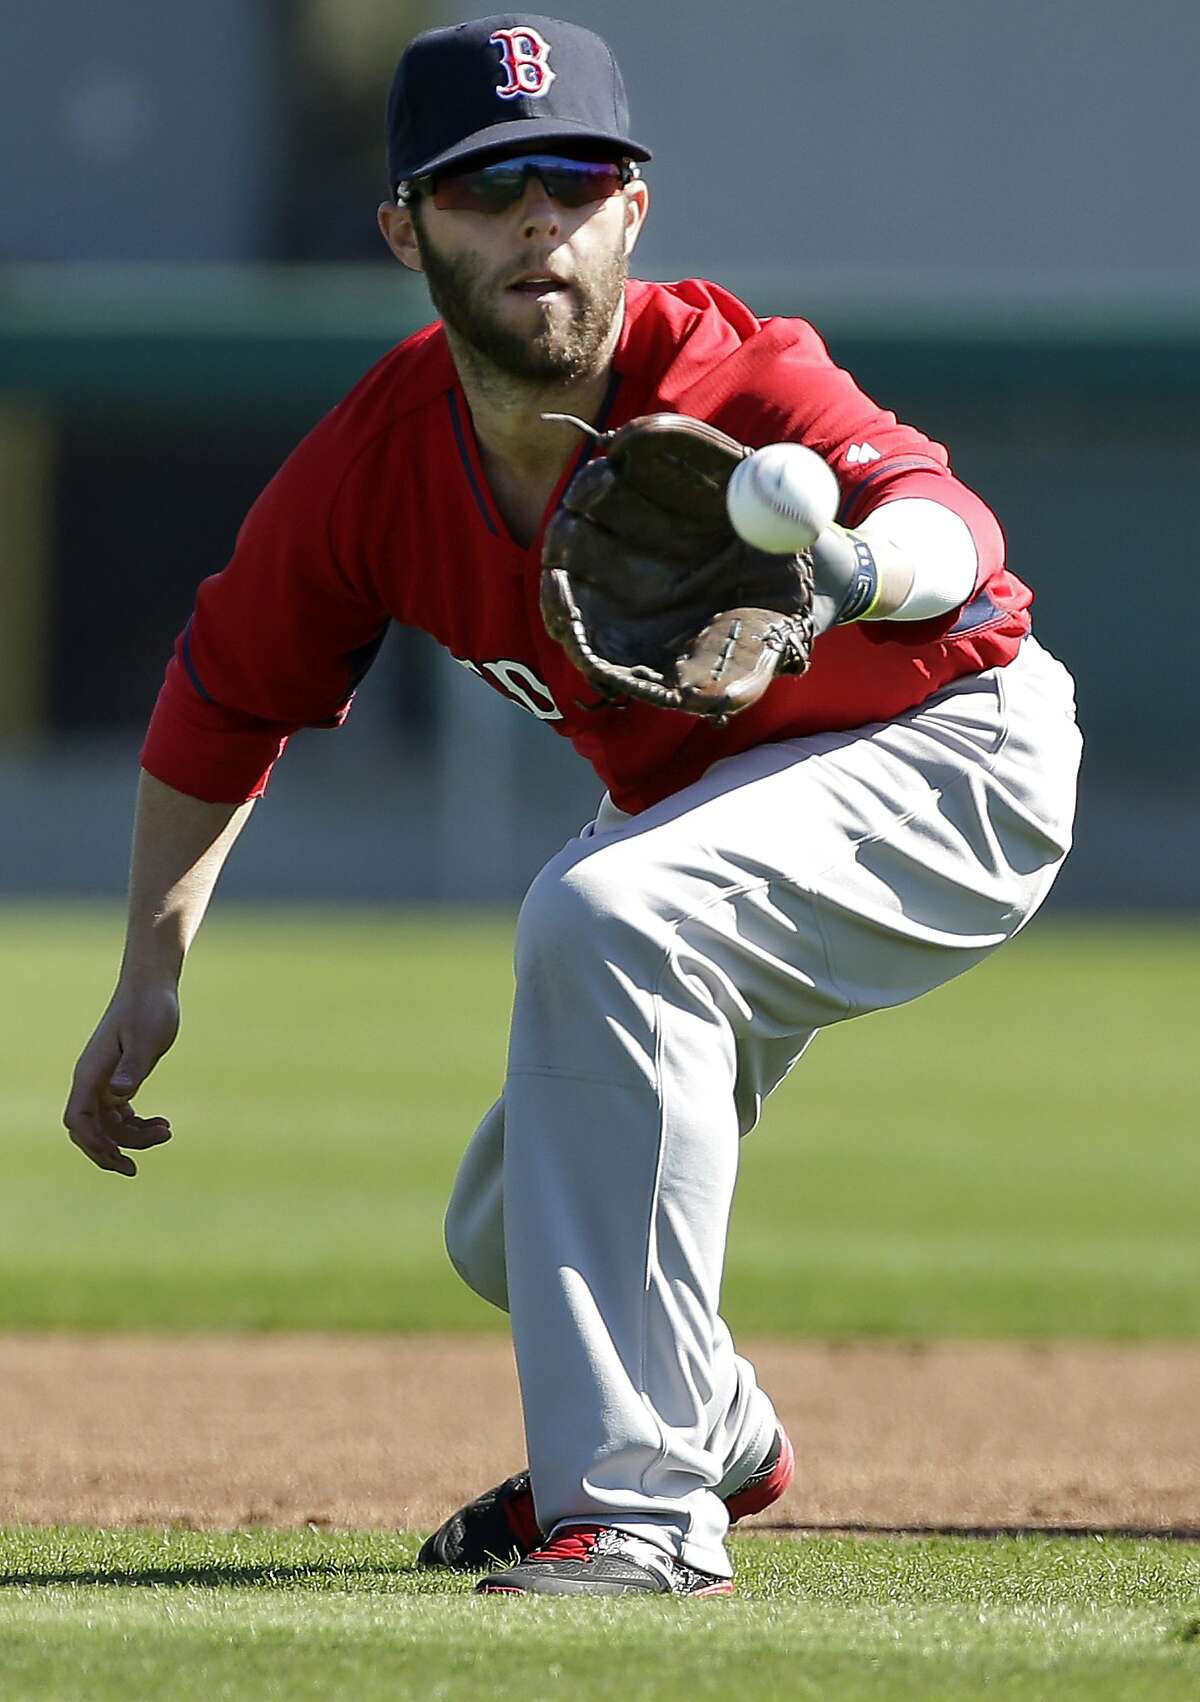 Boston Red Sox second baseman Dustin Pedroia fields a ball during spring training baseball practice, Monday, Feb. 17, 2014, in Fort Myers, Fla. (AP Photo/Steven Senne)